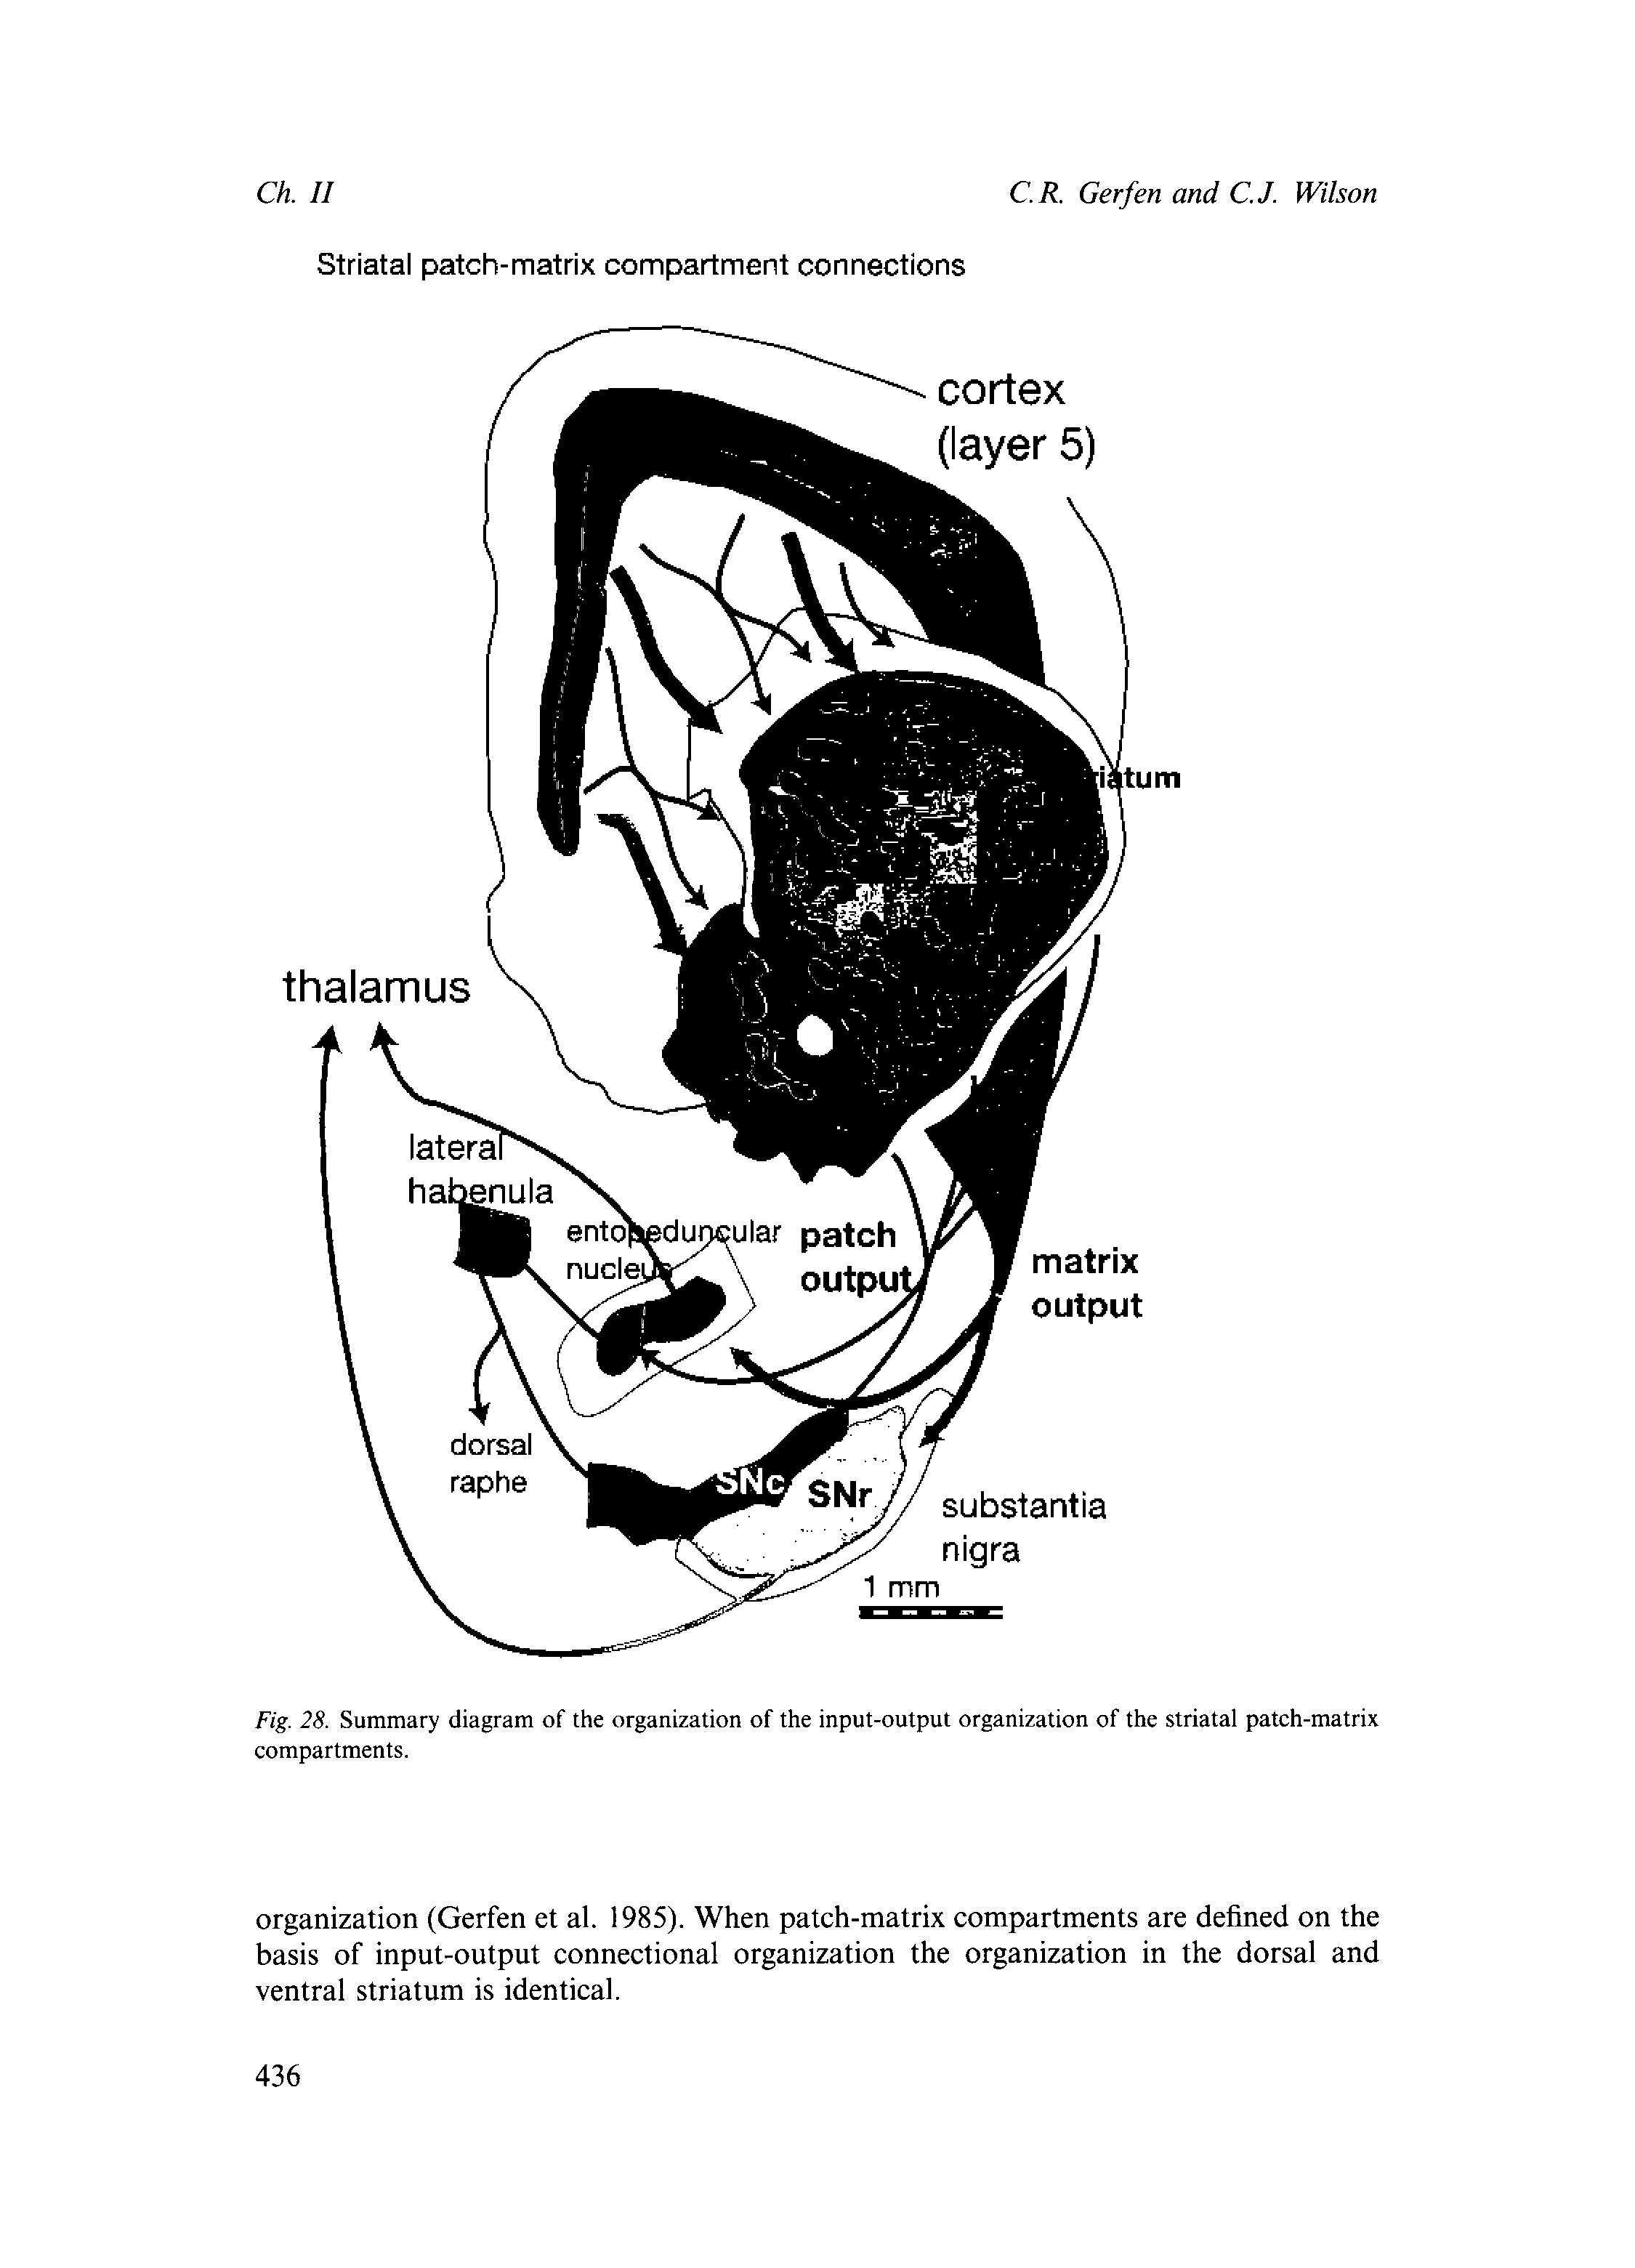 Fig. 28. Summary diagram of the orgairization of the input-output organization of the striatal patch-matrix compartments.